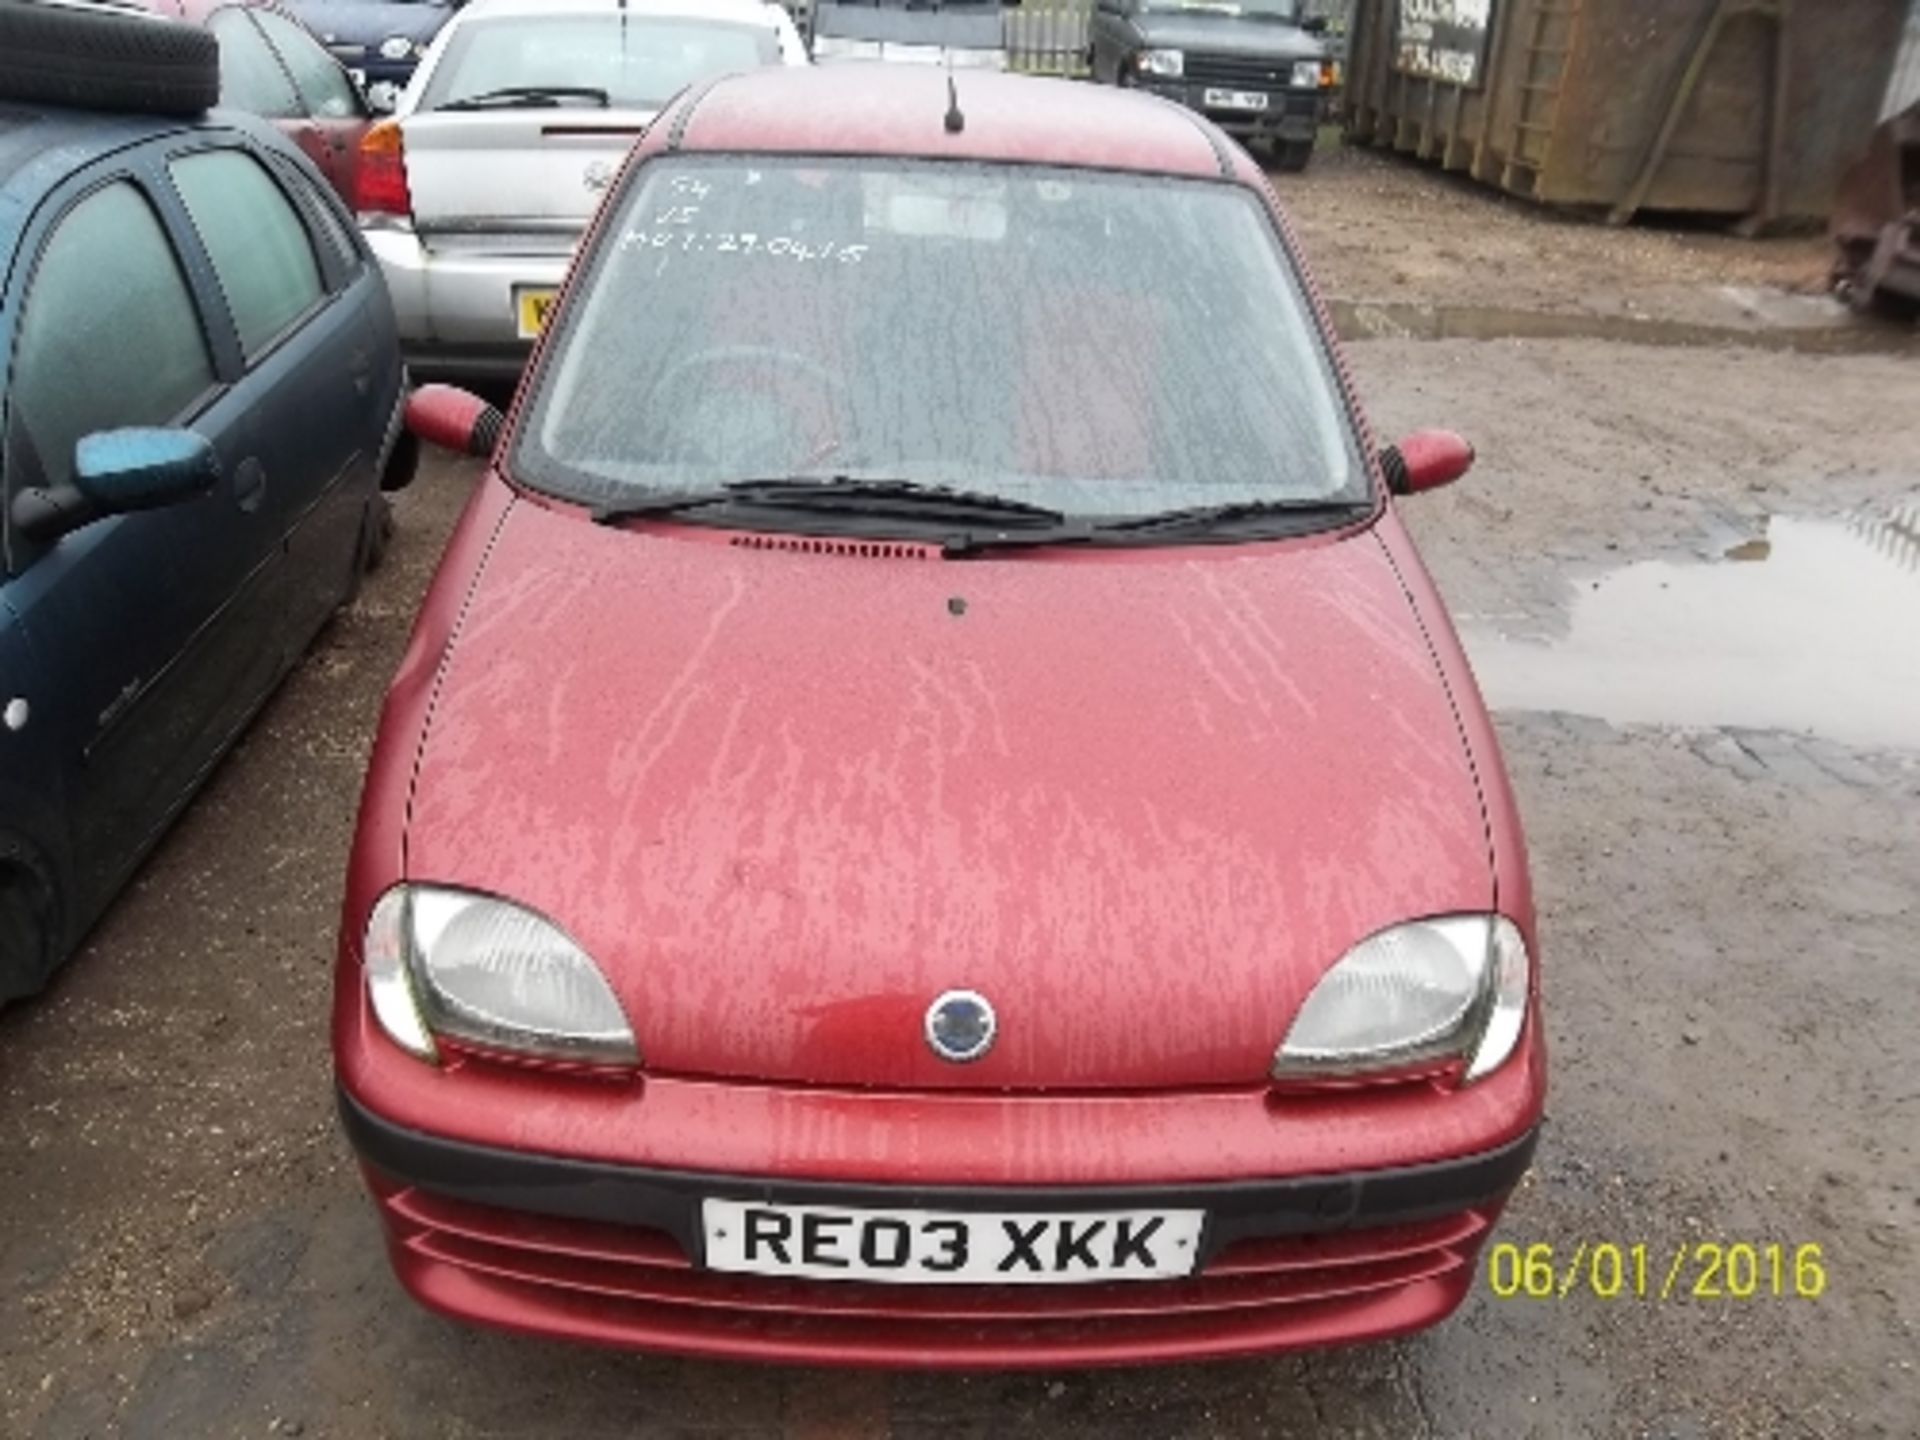 Fiat Seicento Active - RE03 XKK Date of registration:  28.03.2003 1108cc, petrol, manual, red